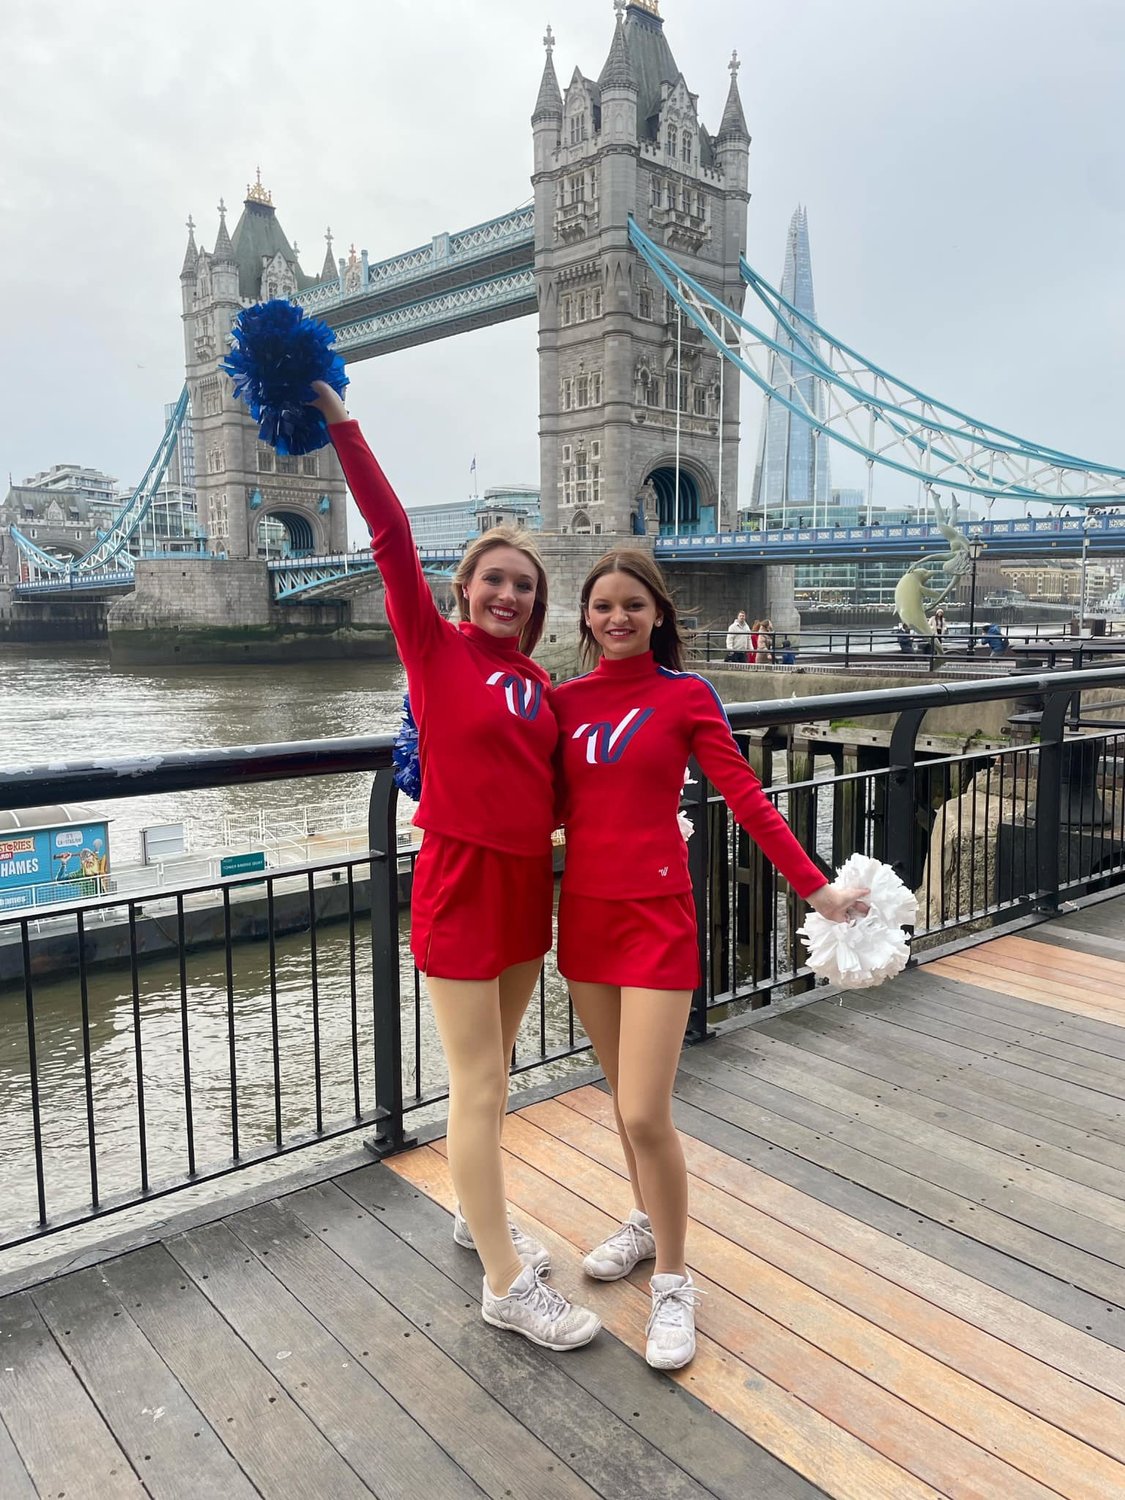 Daphne seniors Kamden Eady and Julie Mathews represented their school abroad when they marched in the New Year’s Day Parade in London as Varsity All-Americans. They were two of four local athletes from Baldwin County participating in All-American events.